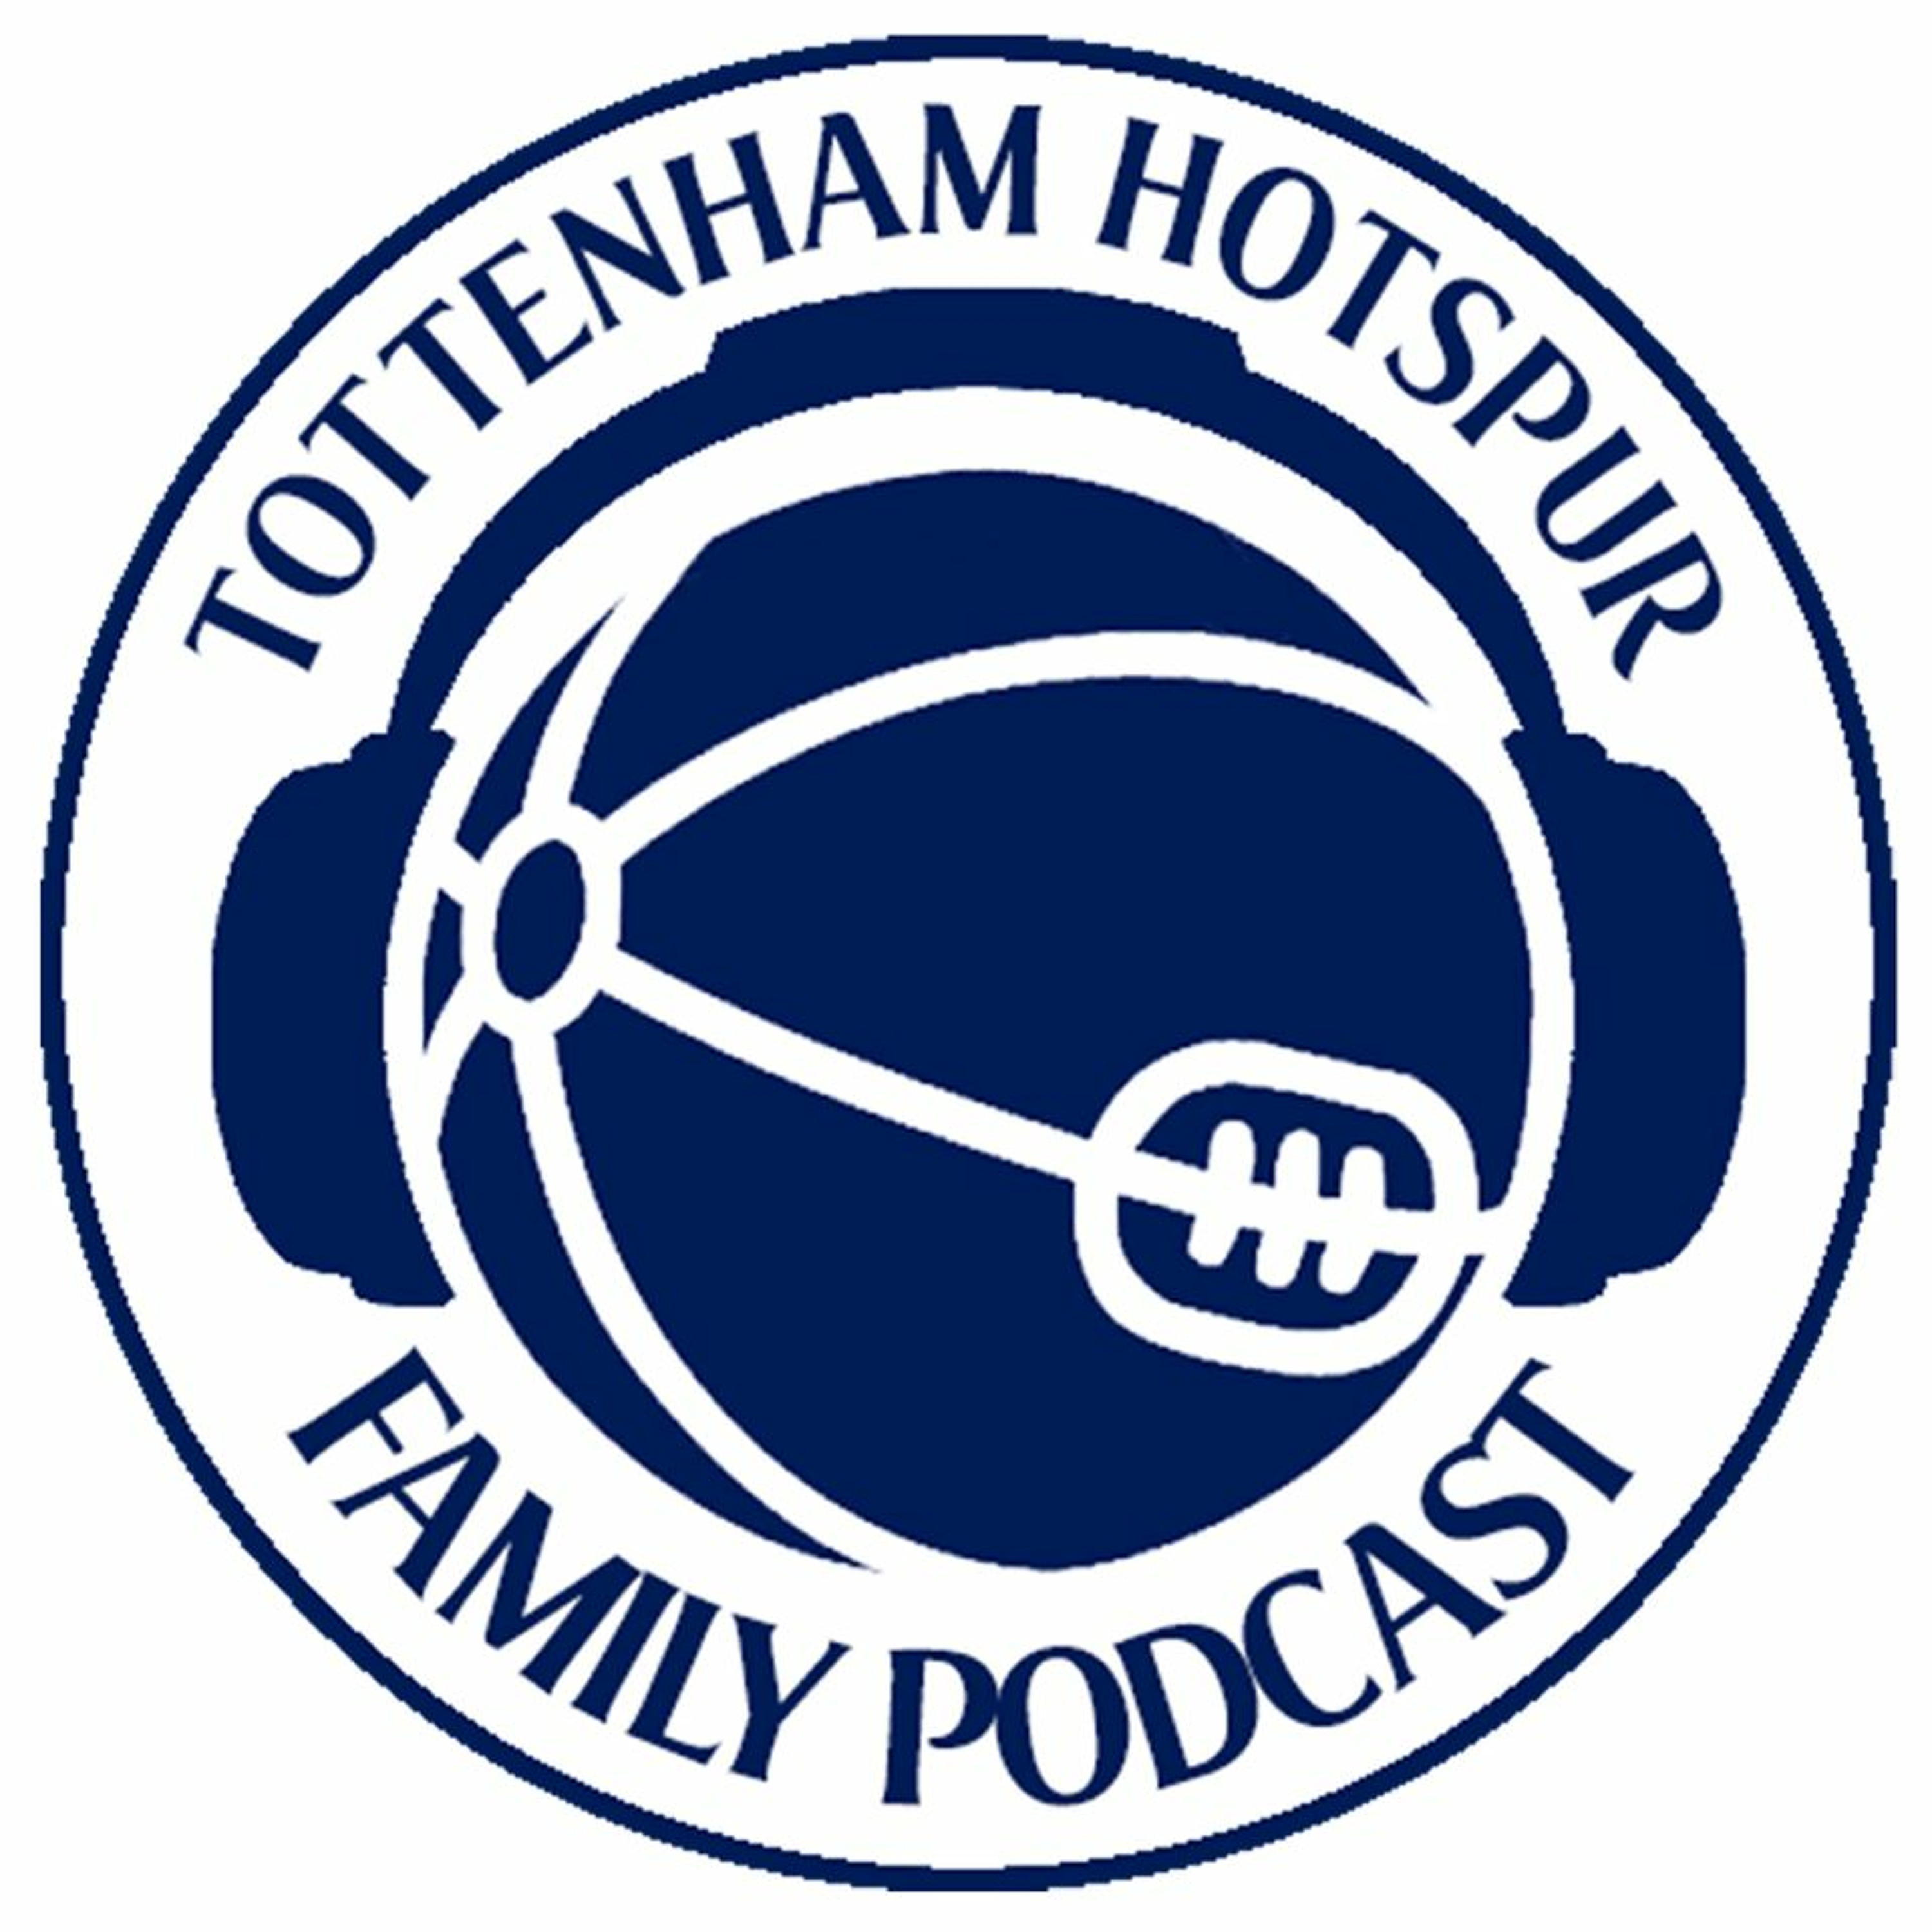 The Tottenham Hotspur Family Podcast - S4EP31 Stoke City is a Sh*t hole, i want to go home